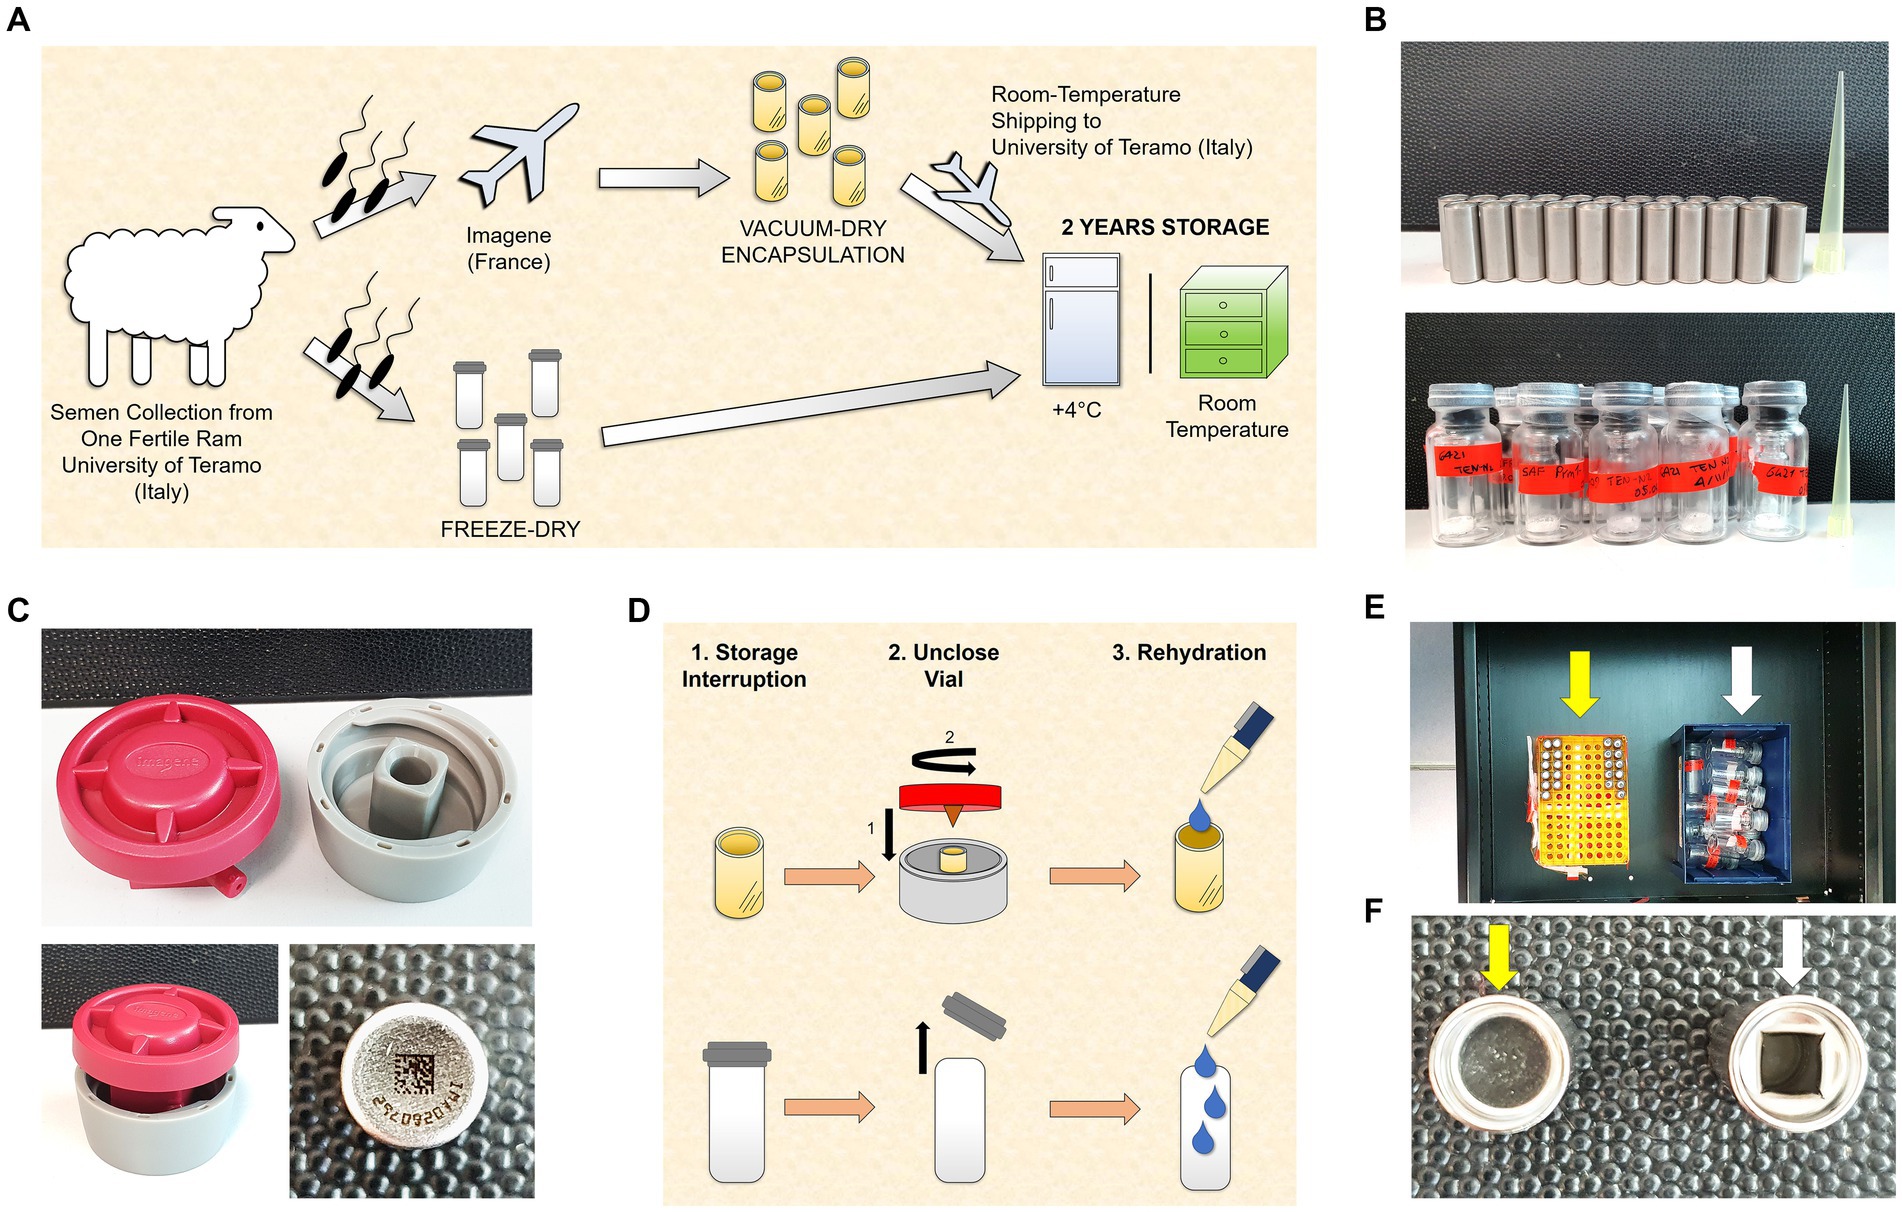 Frontiers  Reviving vacuum-dried encapsulated ram spermatozoa via ICSI  after 2 years of storage